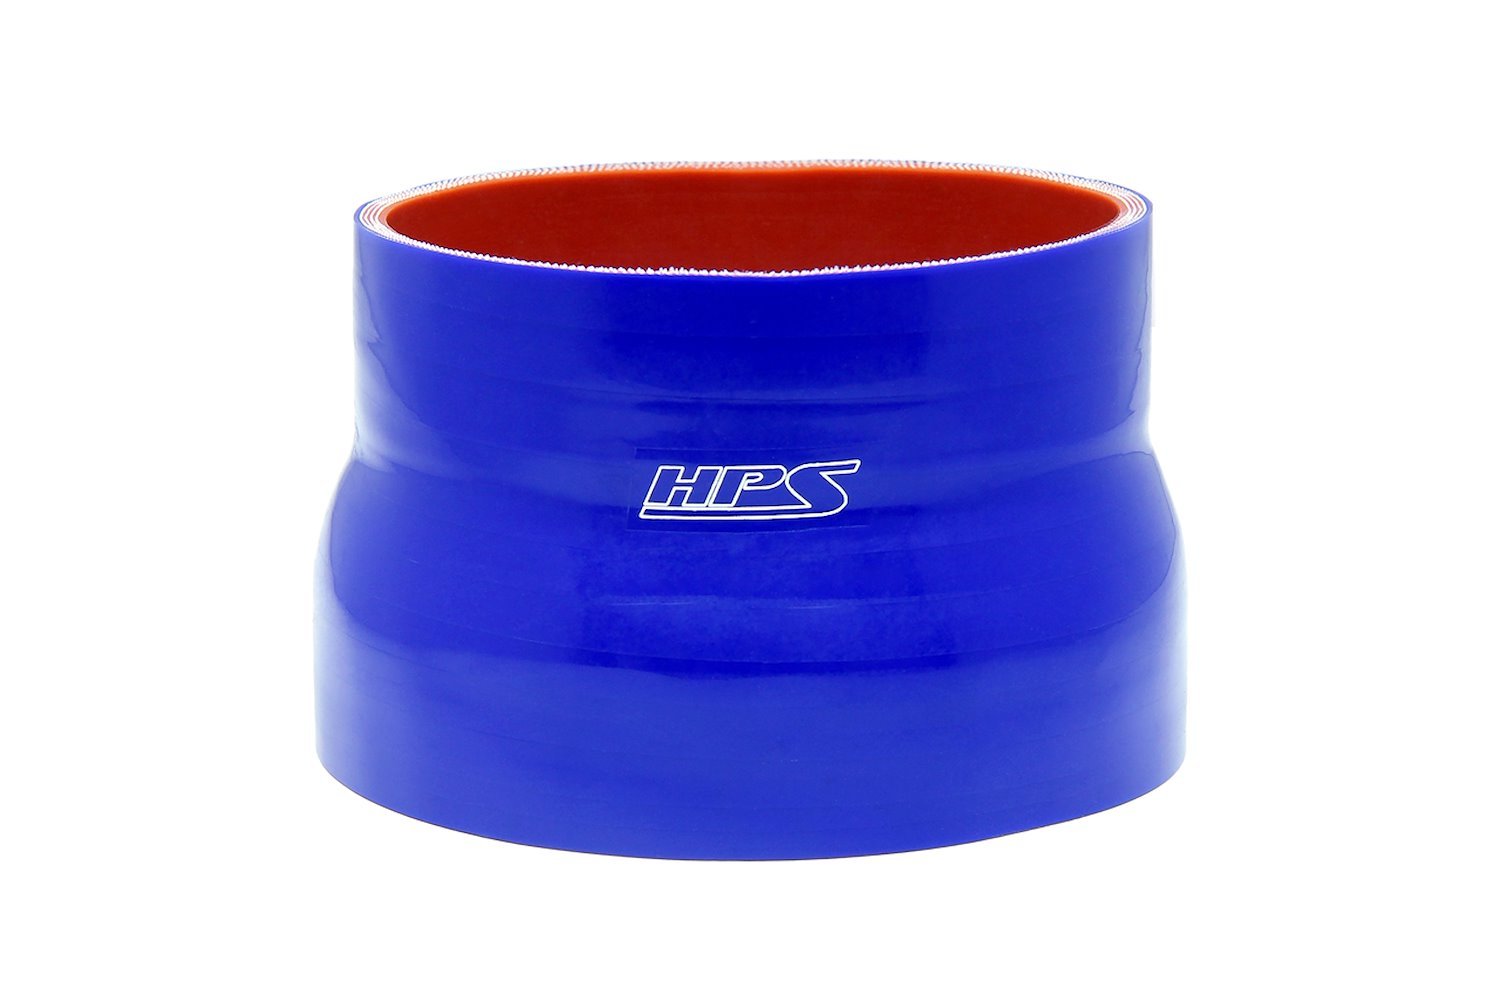 HTSR-350-400-BLUE Silicone Reducer Hose, High-Temp 4-Ply Reinforced, 3-1/2 in. - 4 in. ID, 3 in. Long, Blue